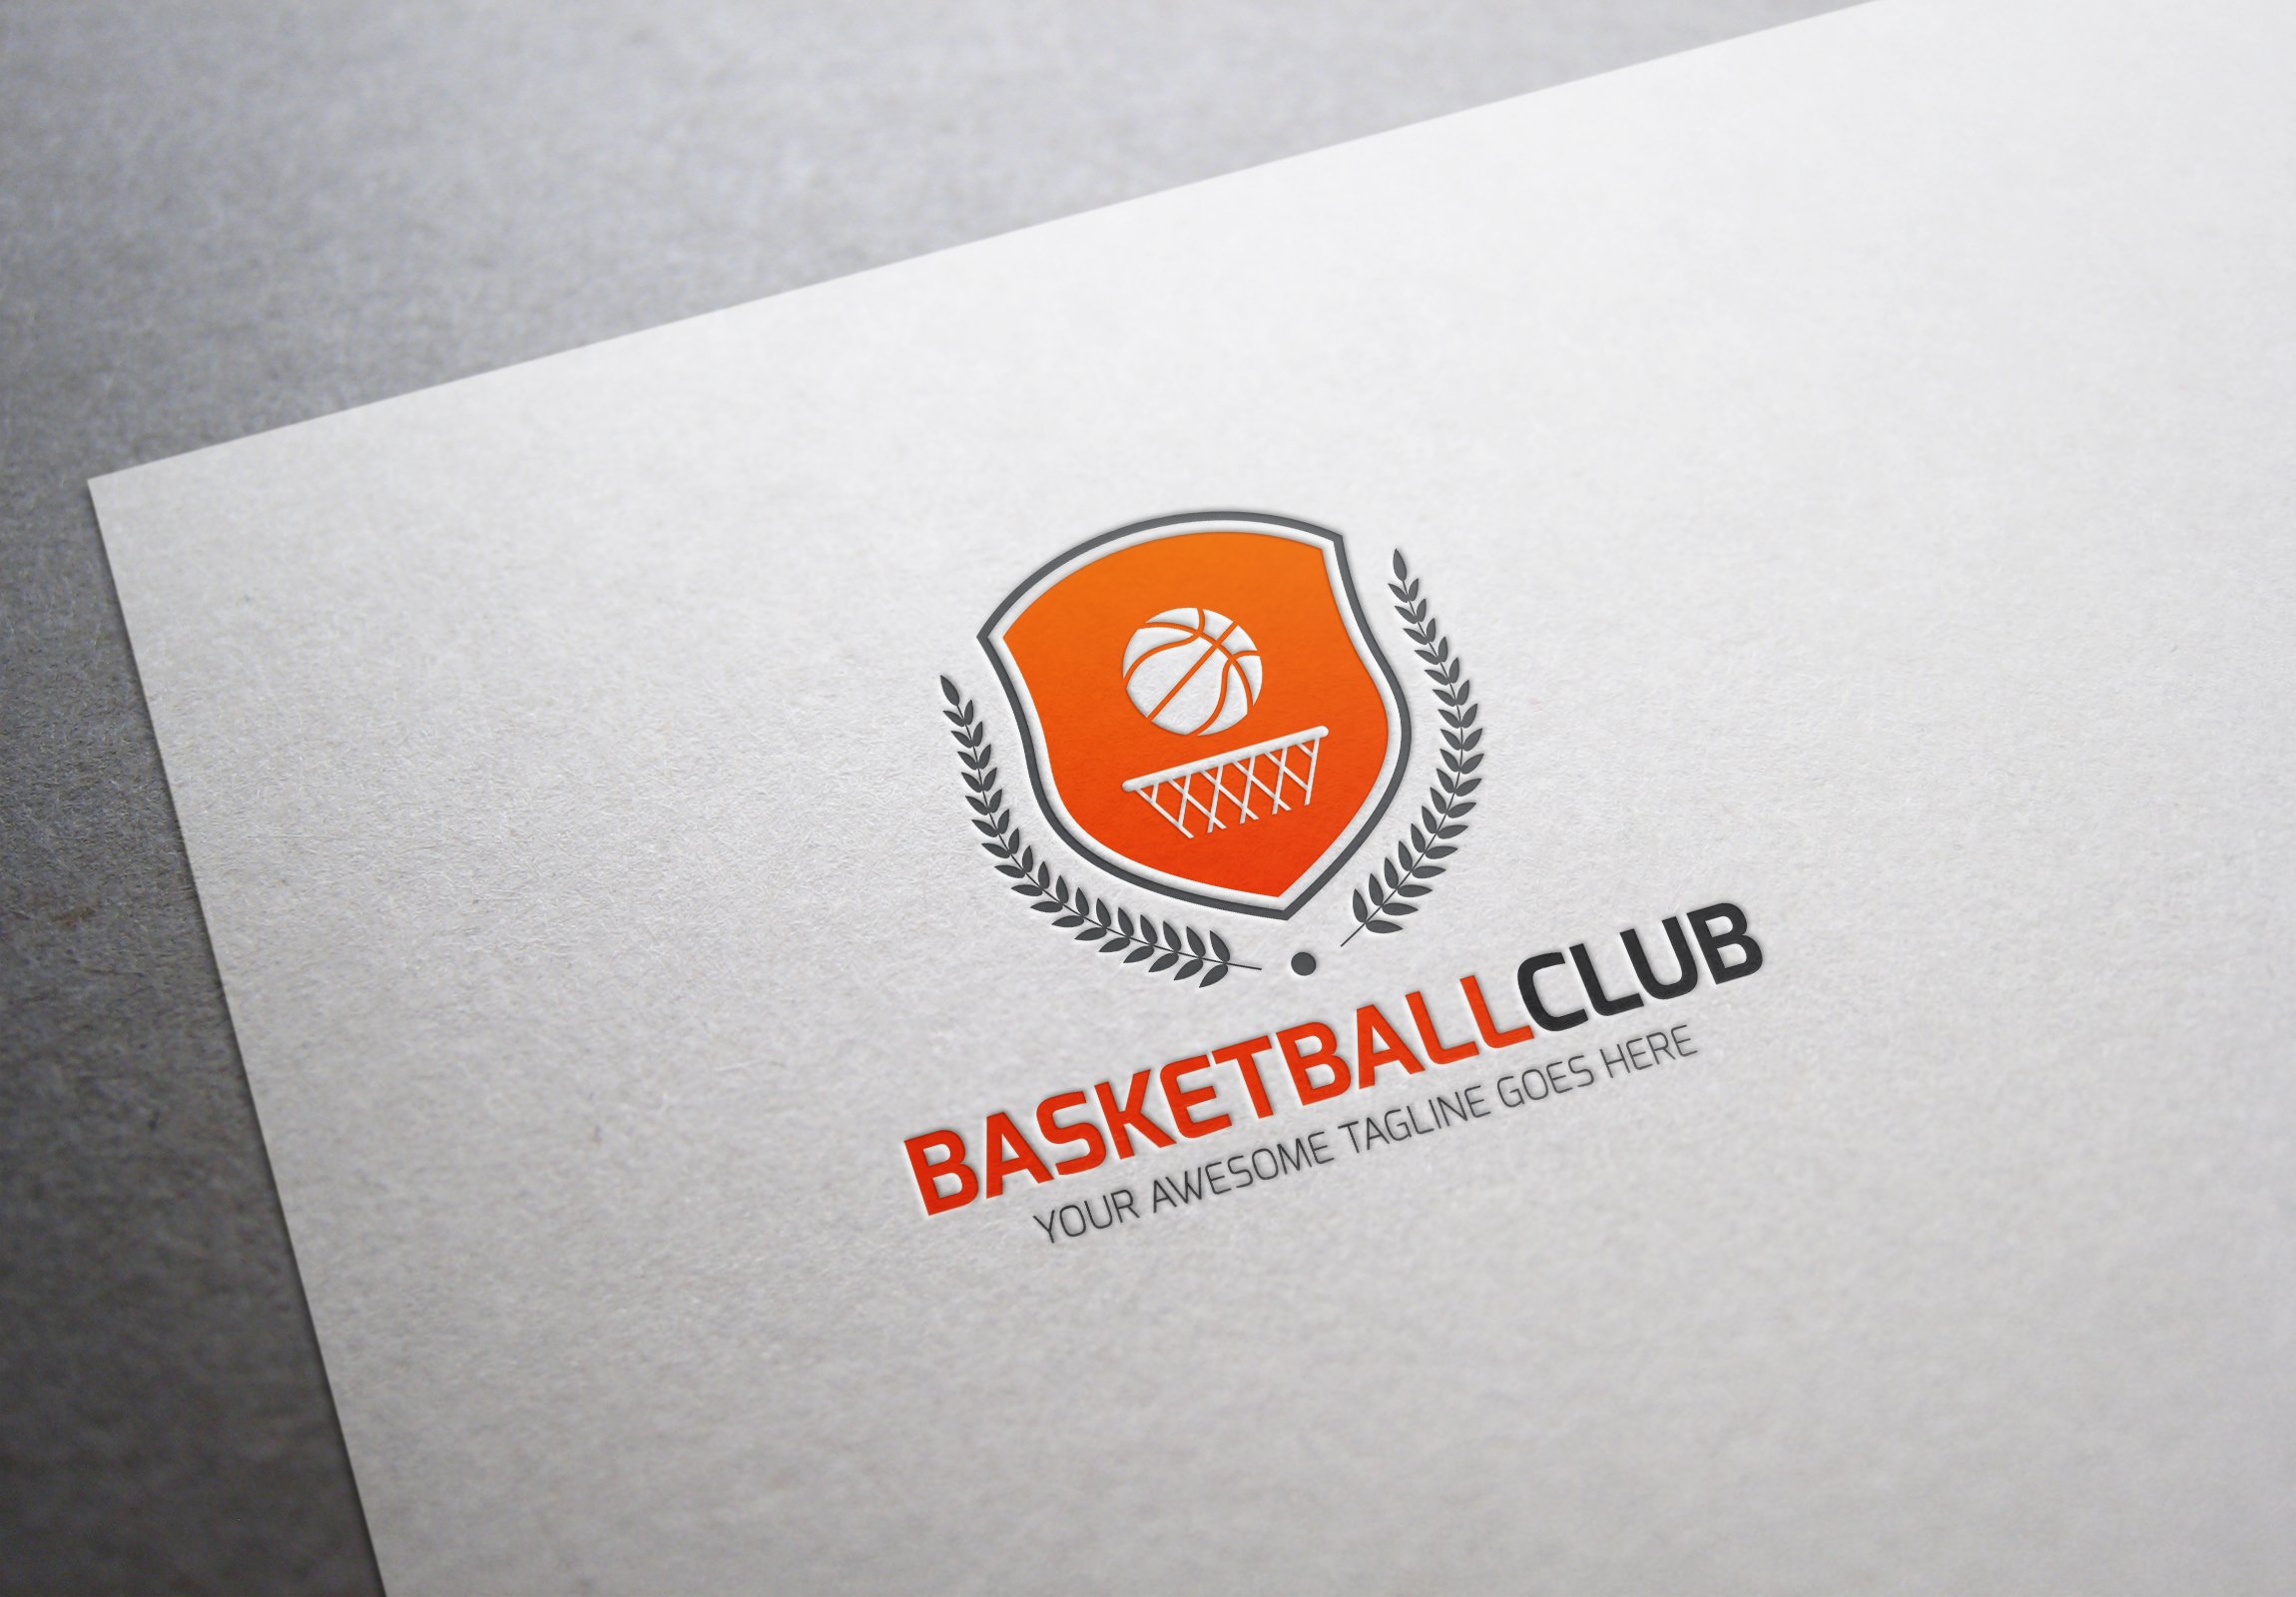 Classic white paper with an orange basketball logo.